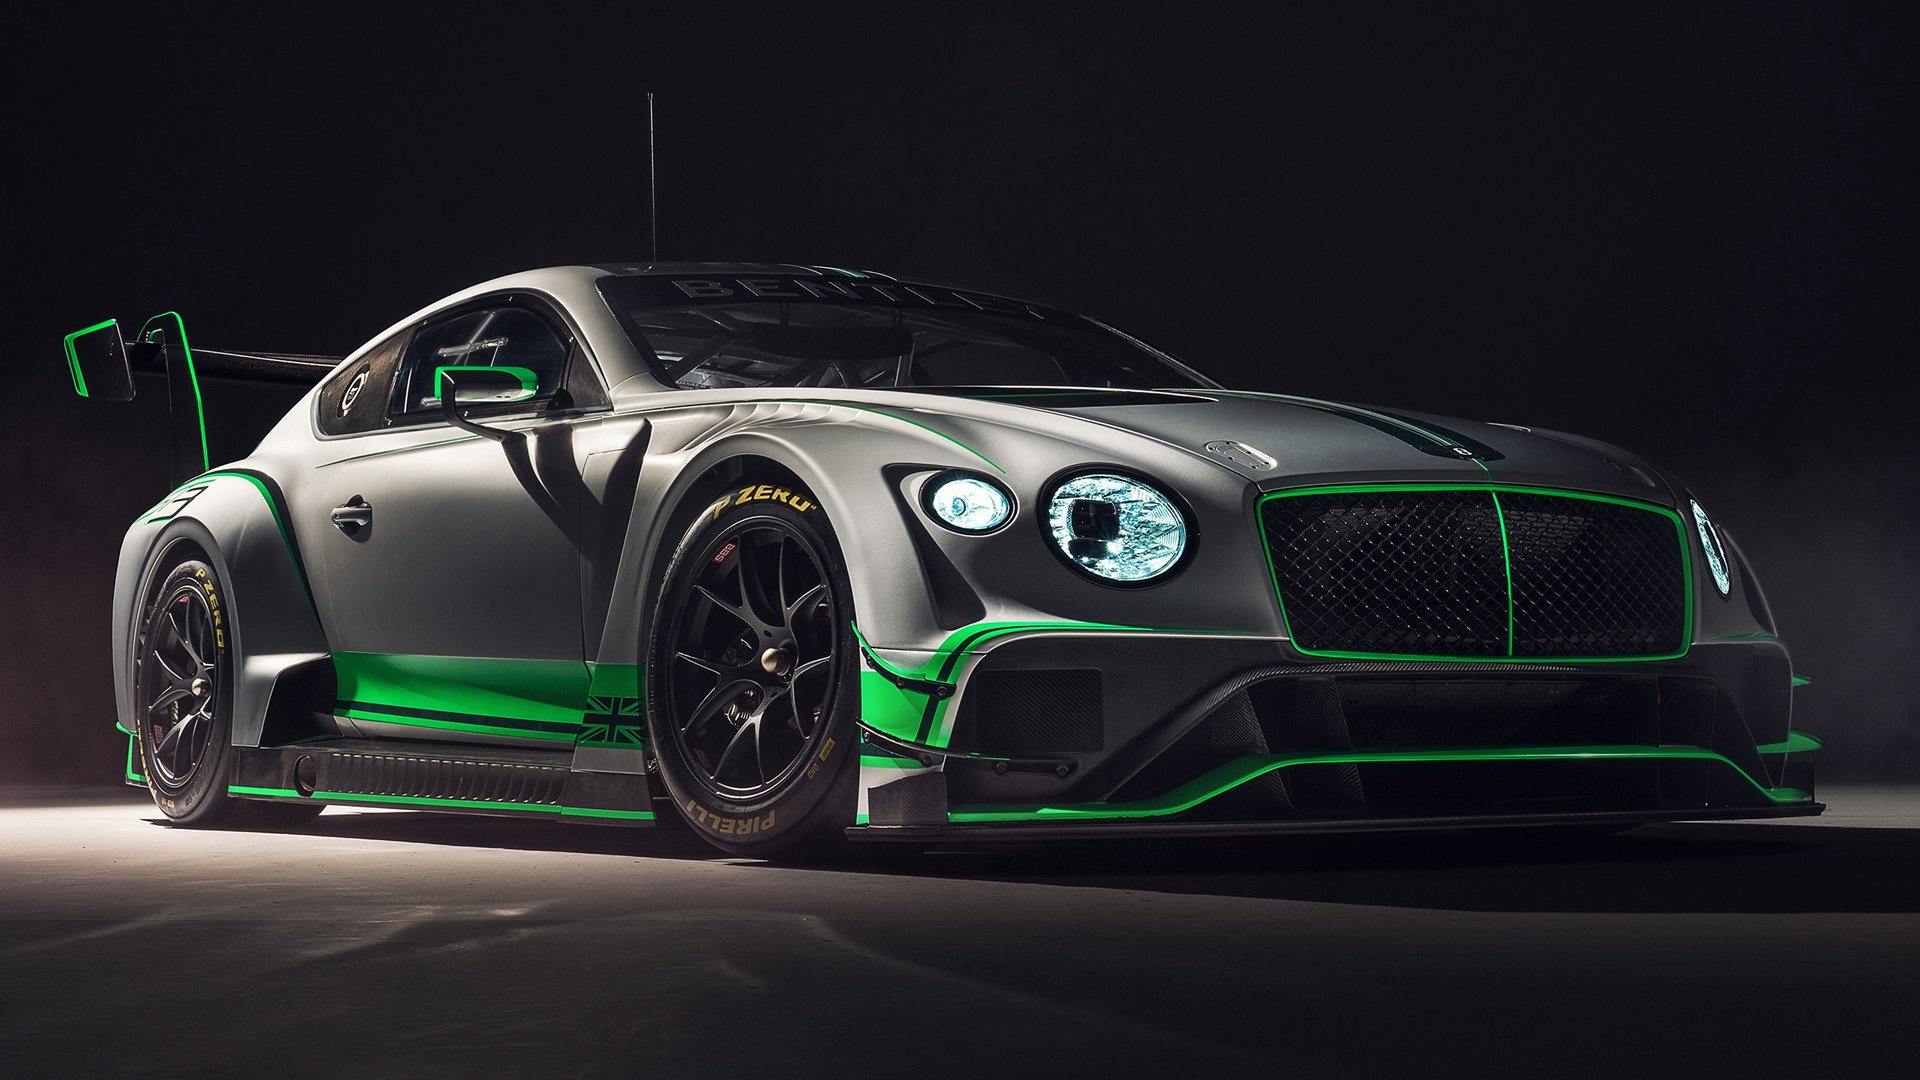 Download Bentley wallpapers for mobile phone free Bentley HD pictures